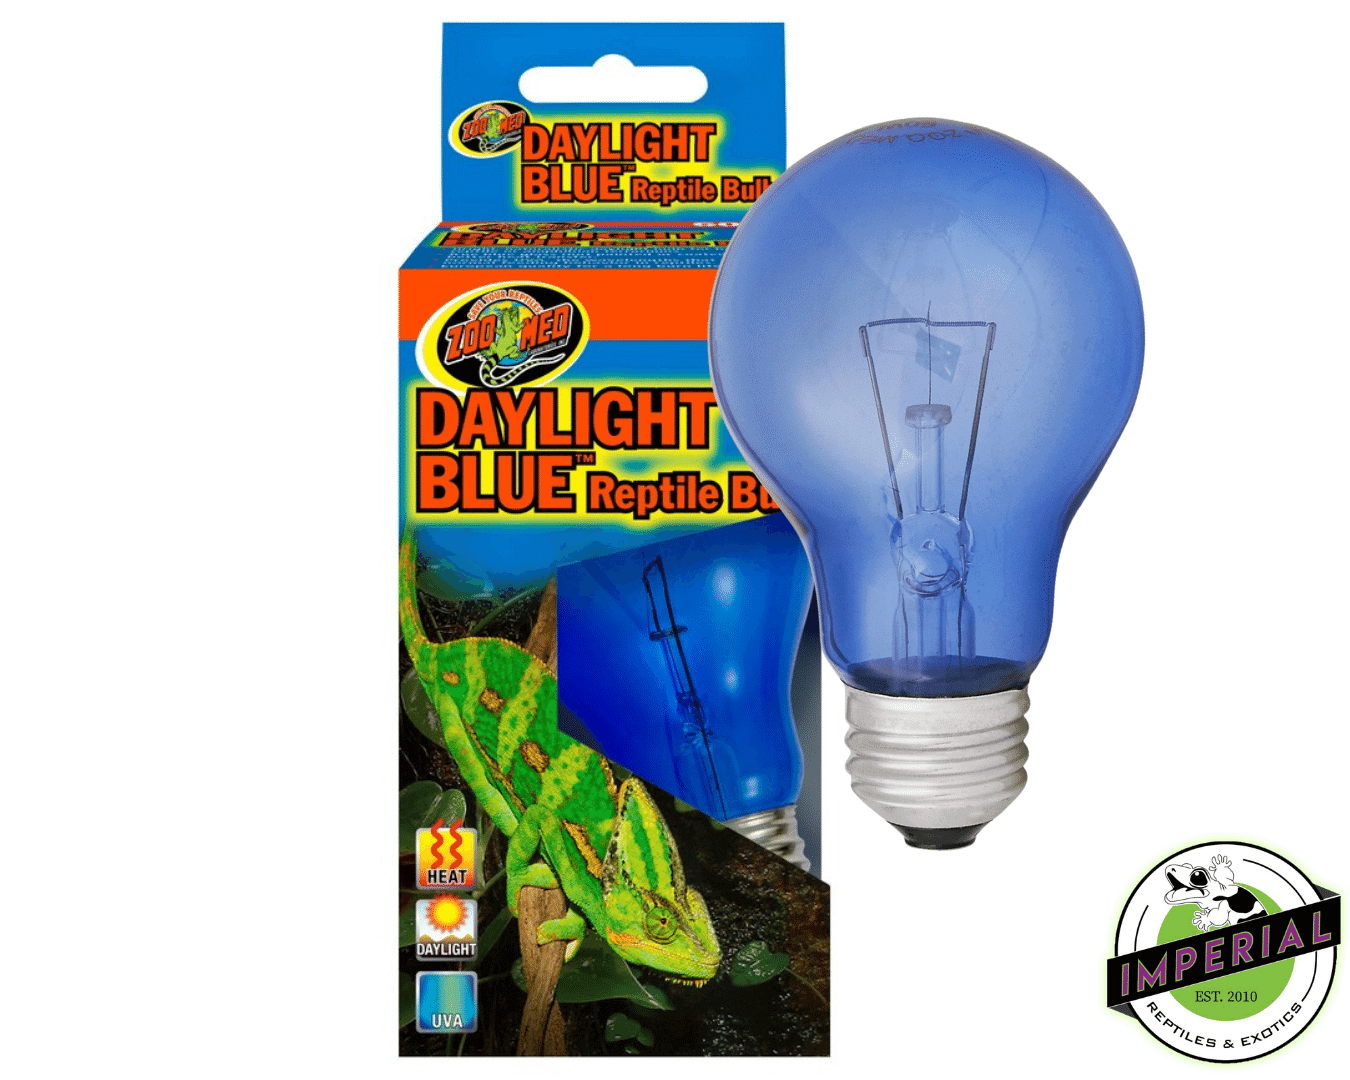 daylight reptile bulb for sale online, buy cheap reptile supplies near me